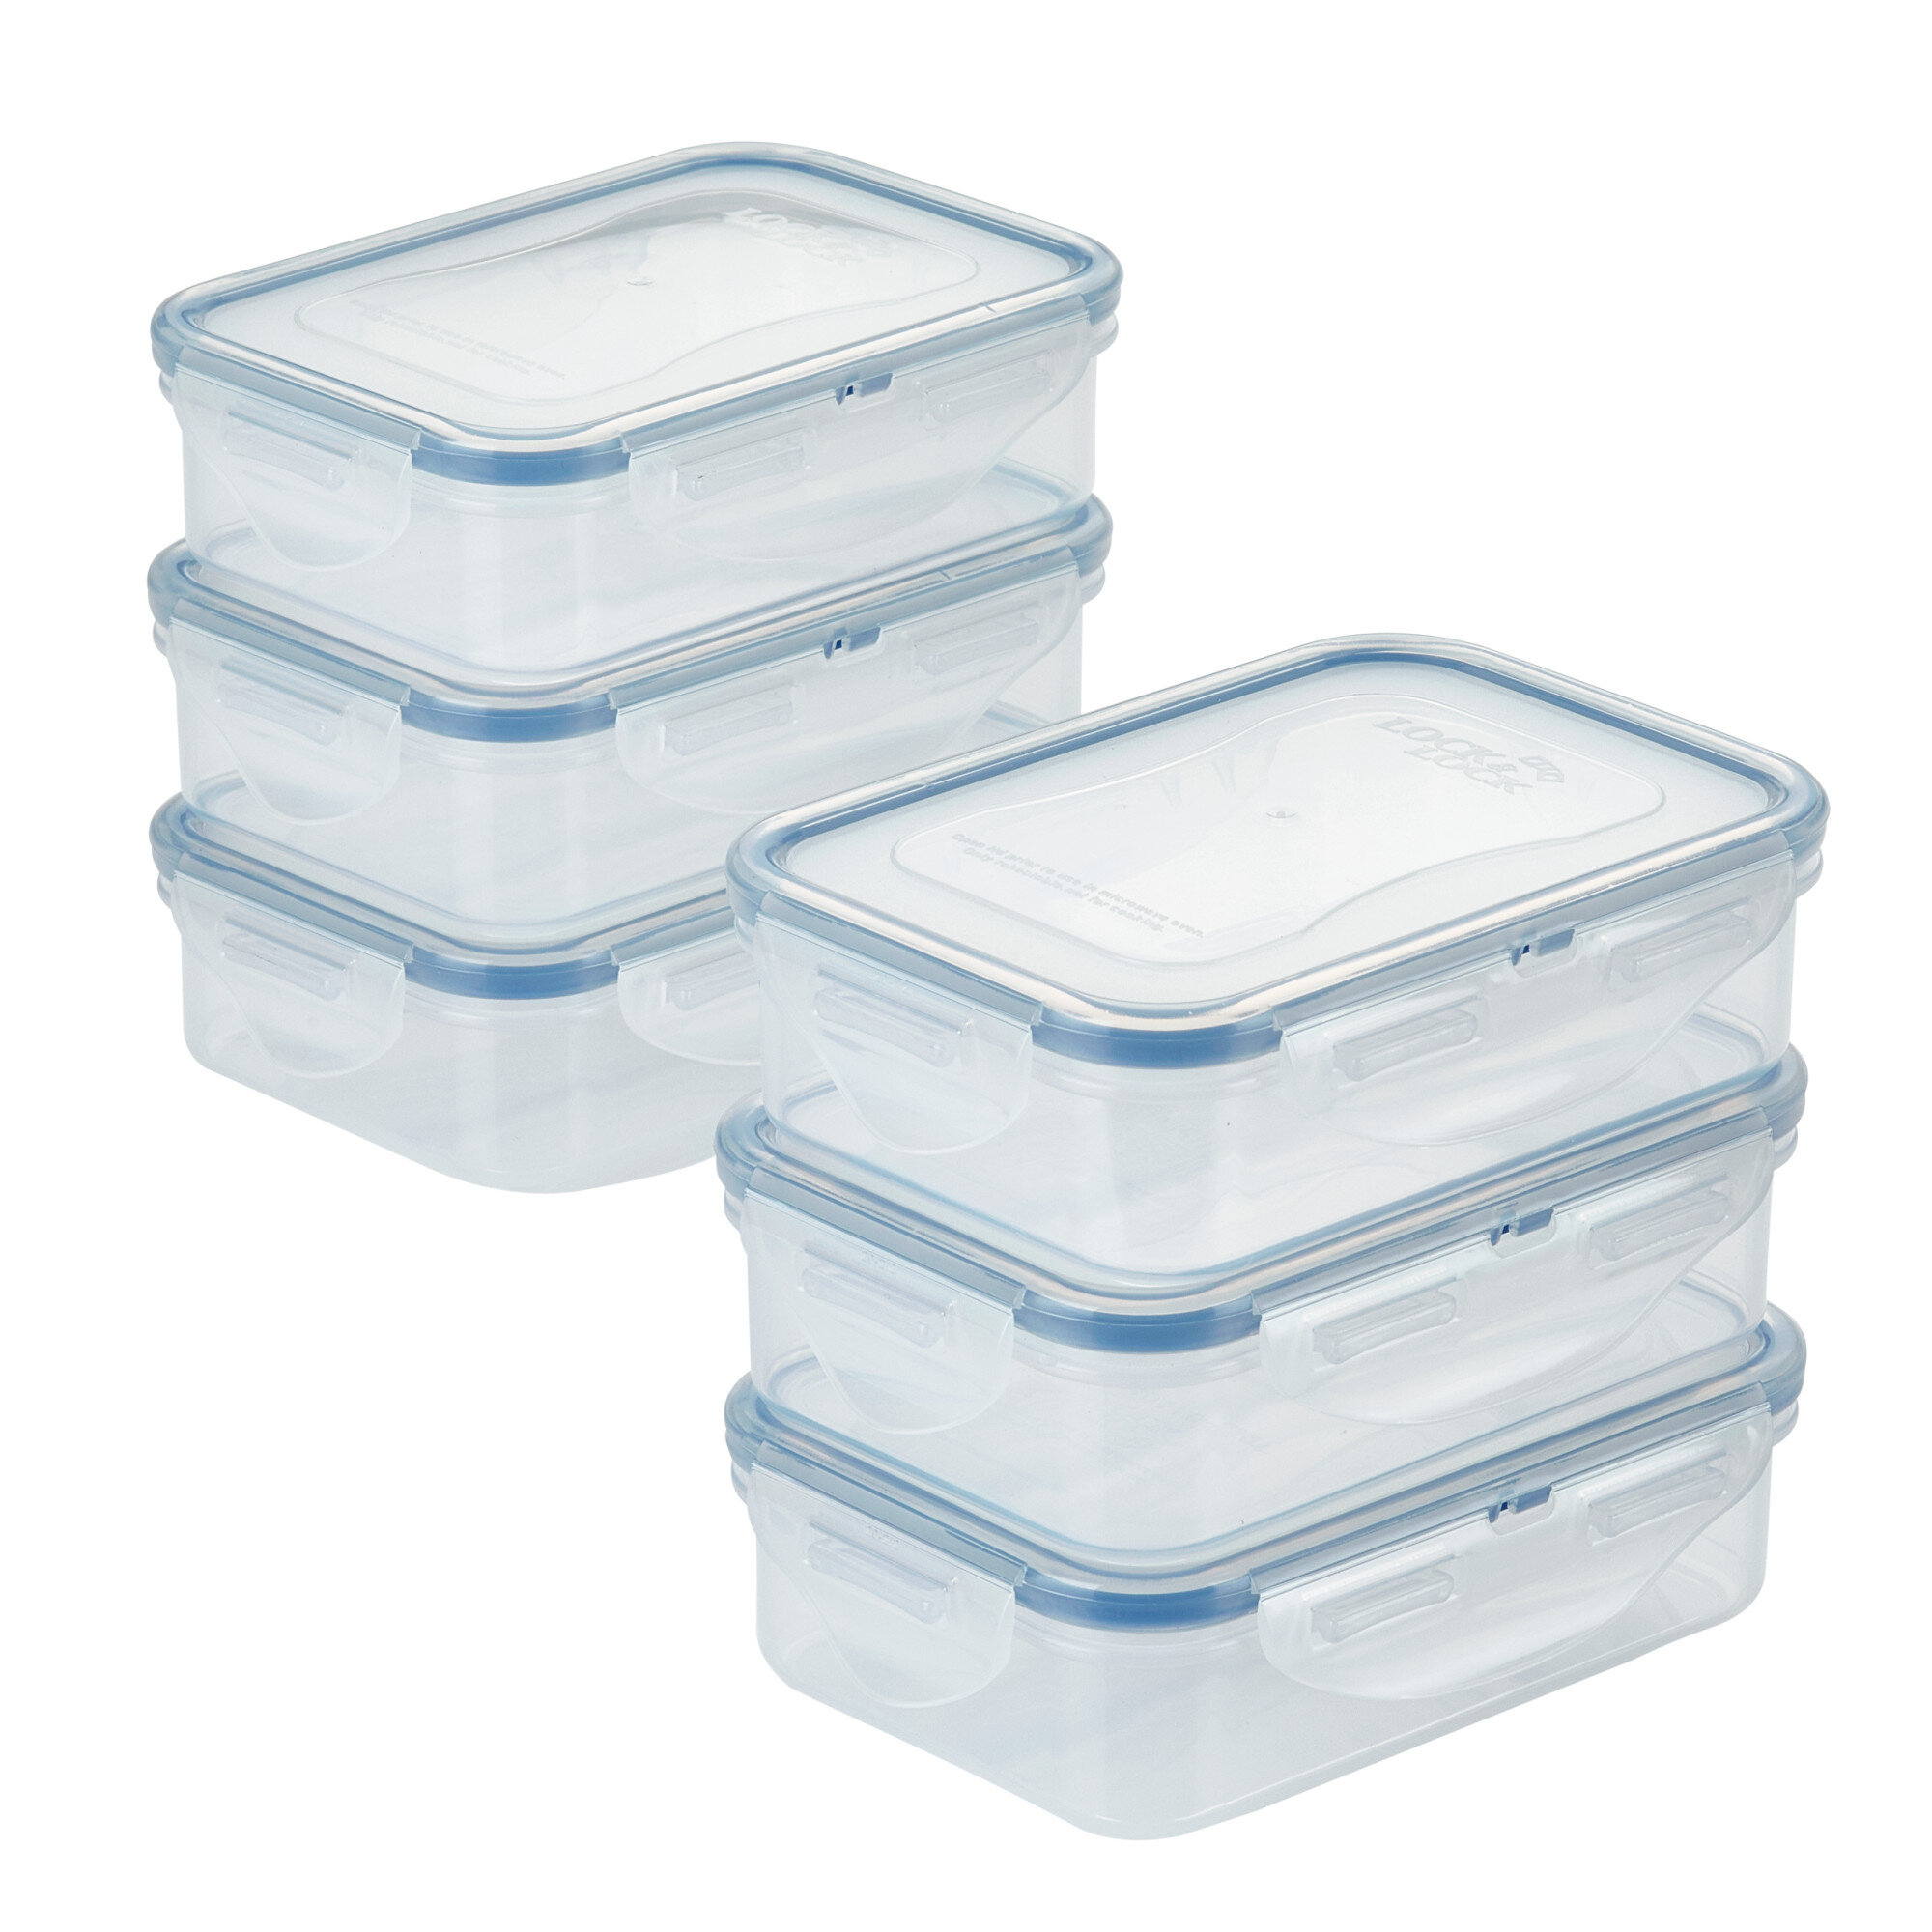  Simplify 6 Piece Set Eco Wheat Plastic Food Storage Containers, Clear Lid, Meal Prep, Leftovers, Kitchen, Lunch, Natural, Rectangular